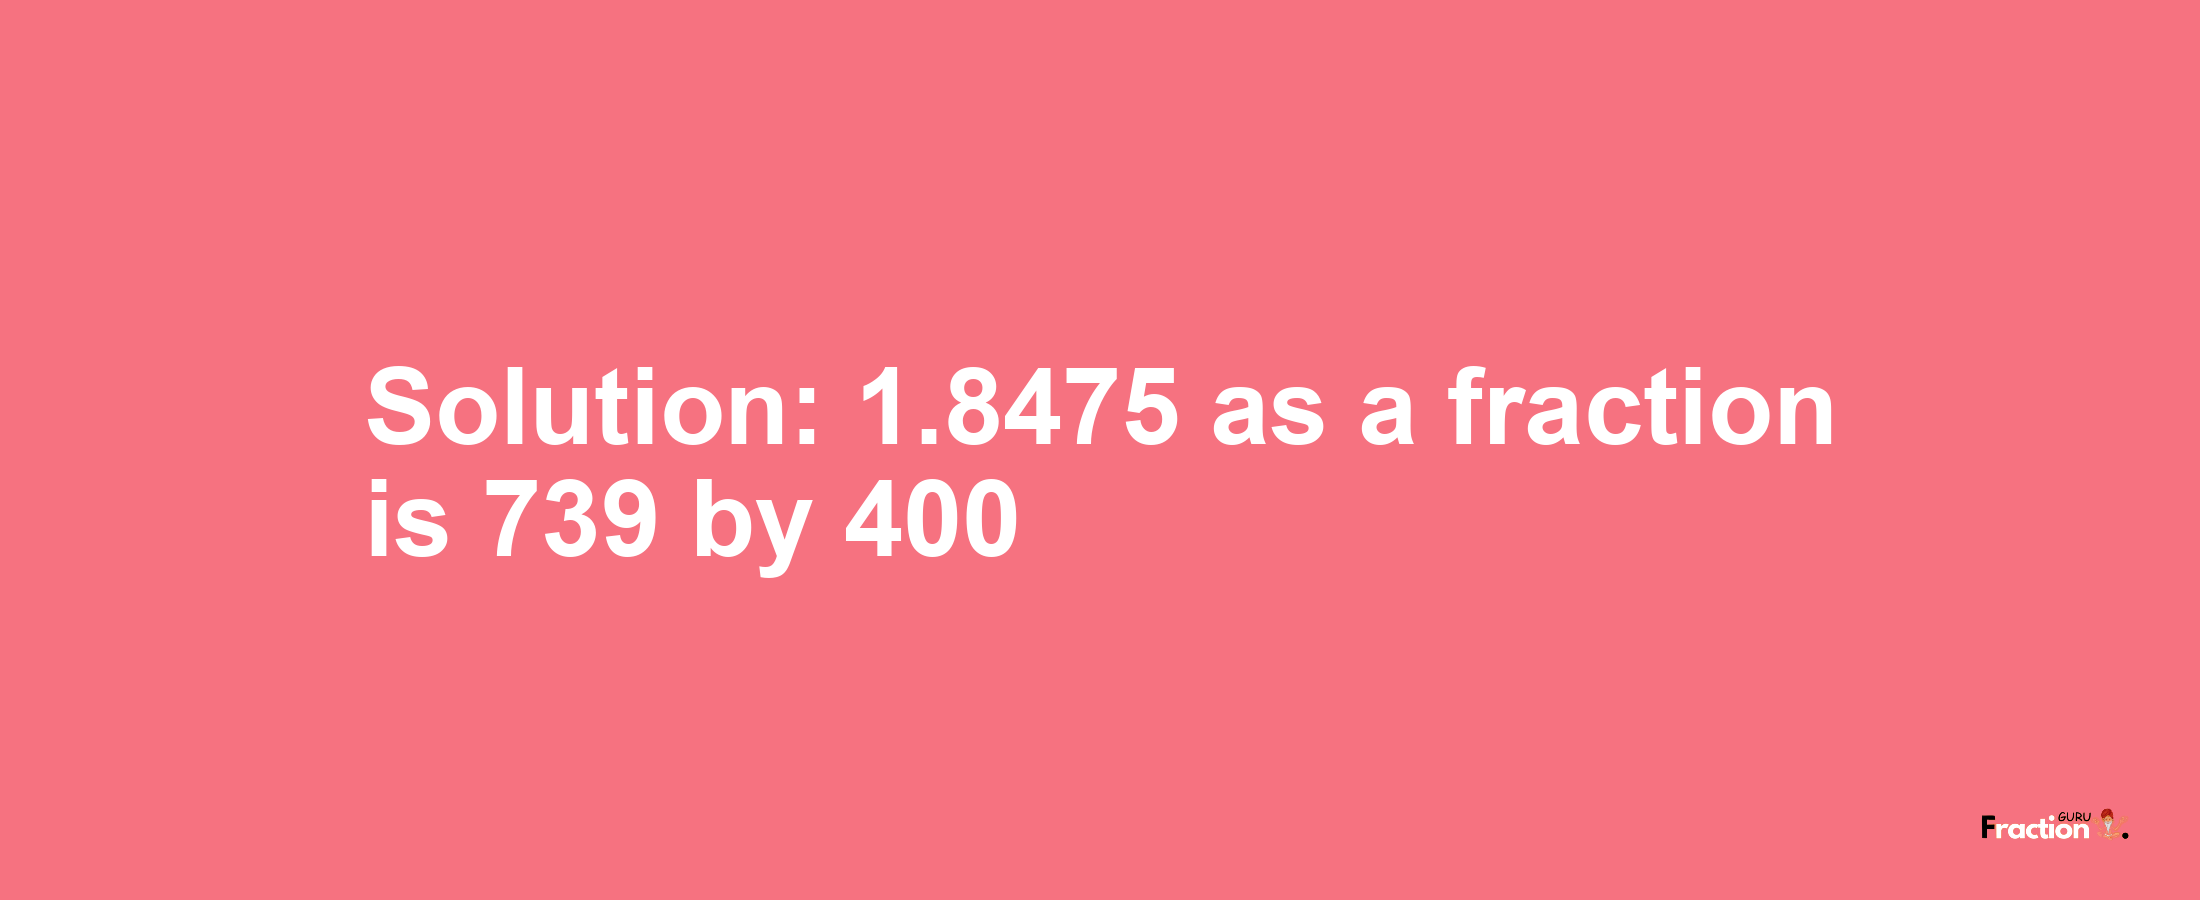 Solution:1.8475 as a fraction is 739/400